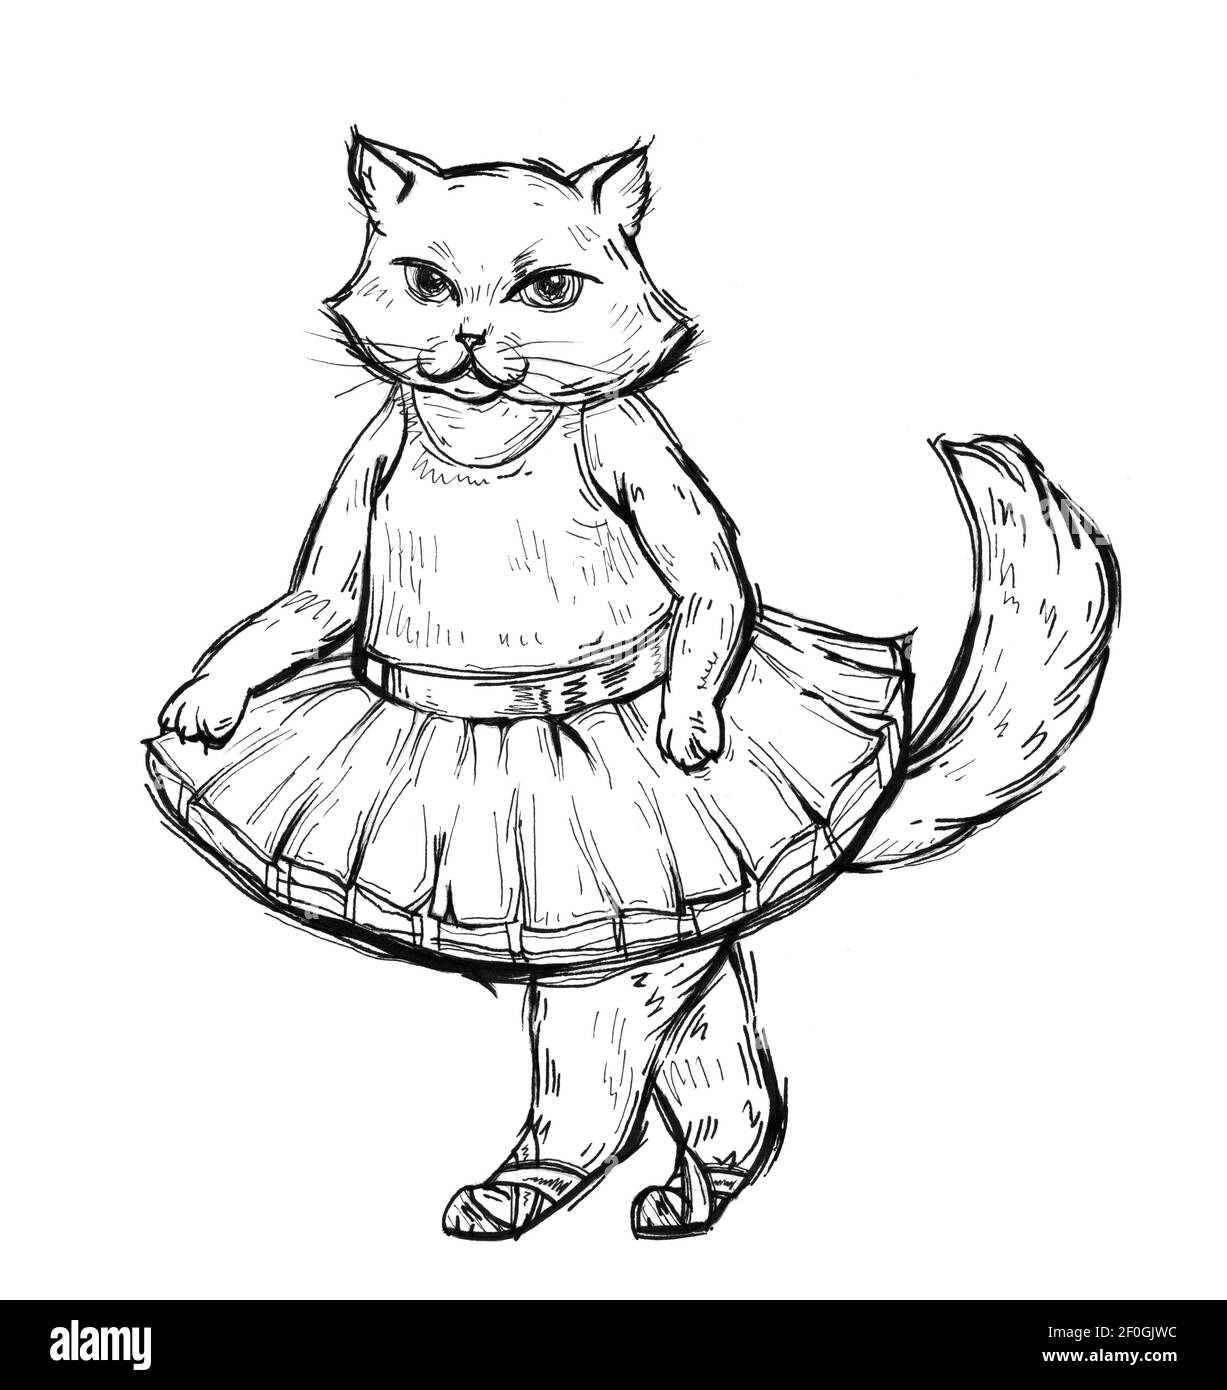 Cat ballerina in ballet dress and pointe. Vintage monochrome hatching illustration isolated on white background. Hand drawn design element for t-shirt Stock Photo